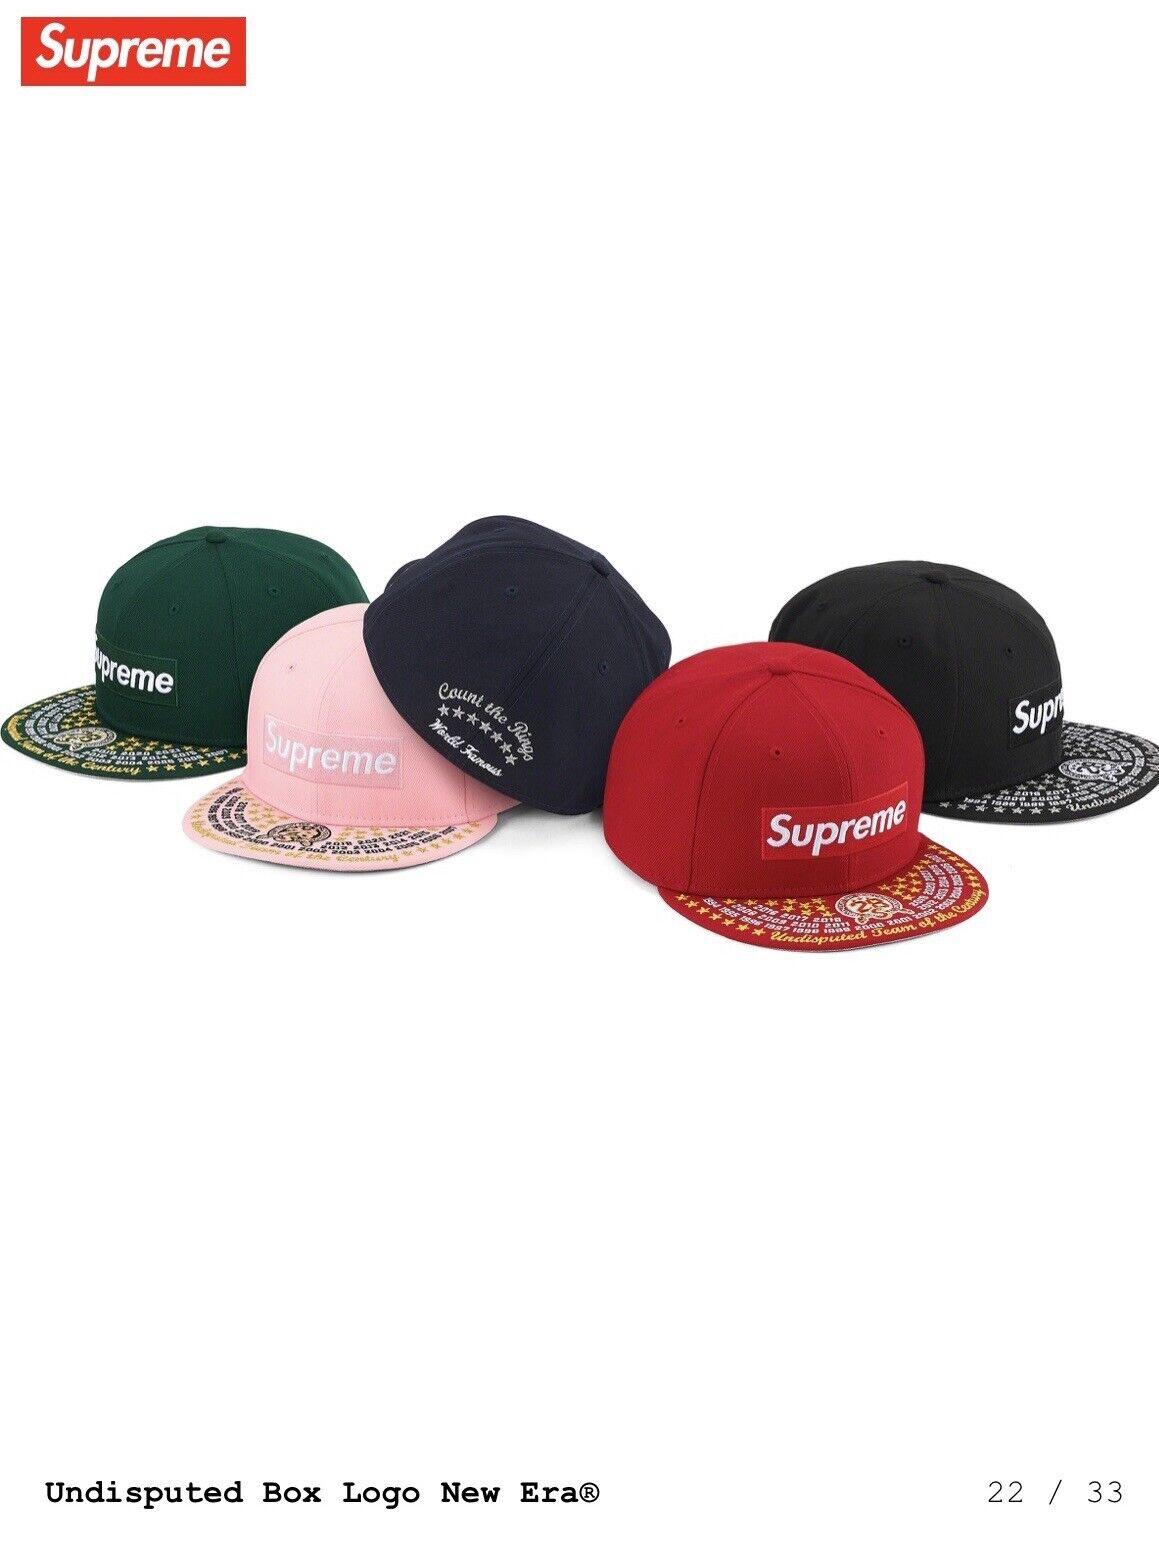 Supreme Undisputed Box Logo New Era Hat Fitted black Size 7 5/8